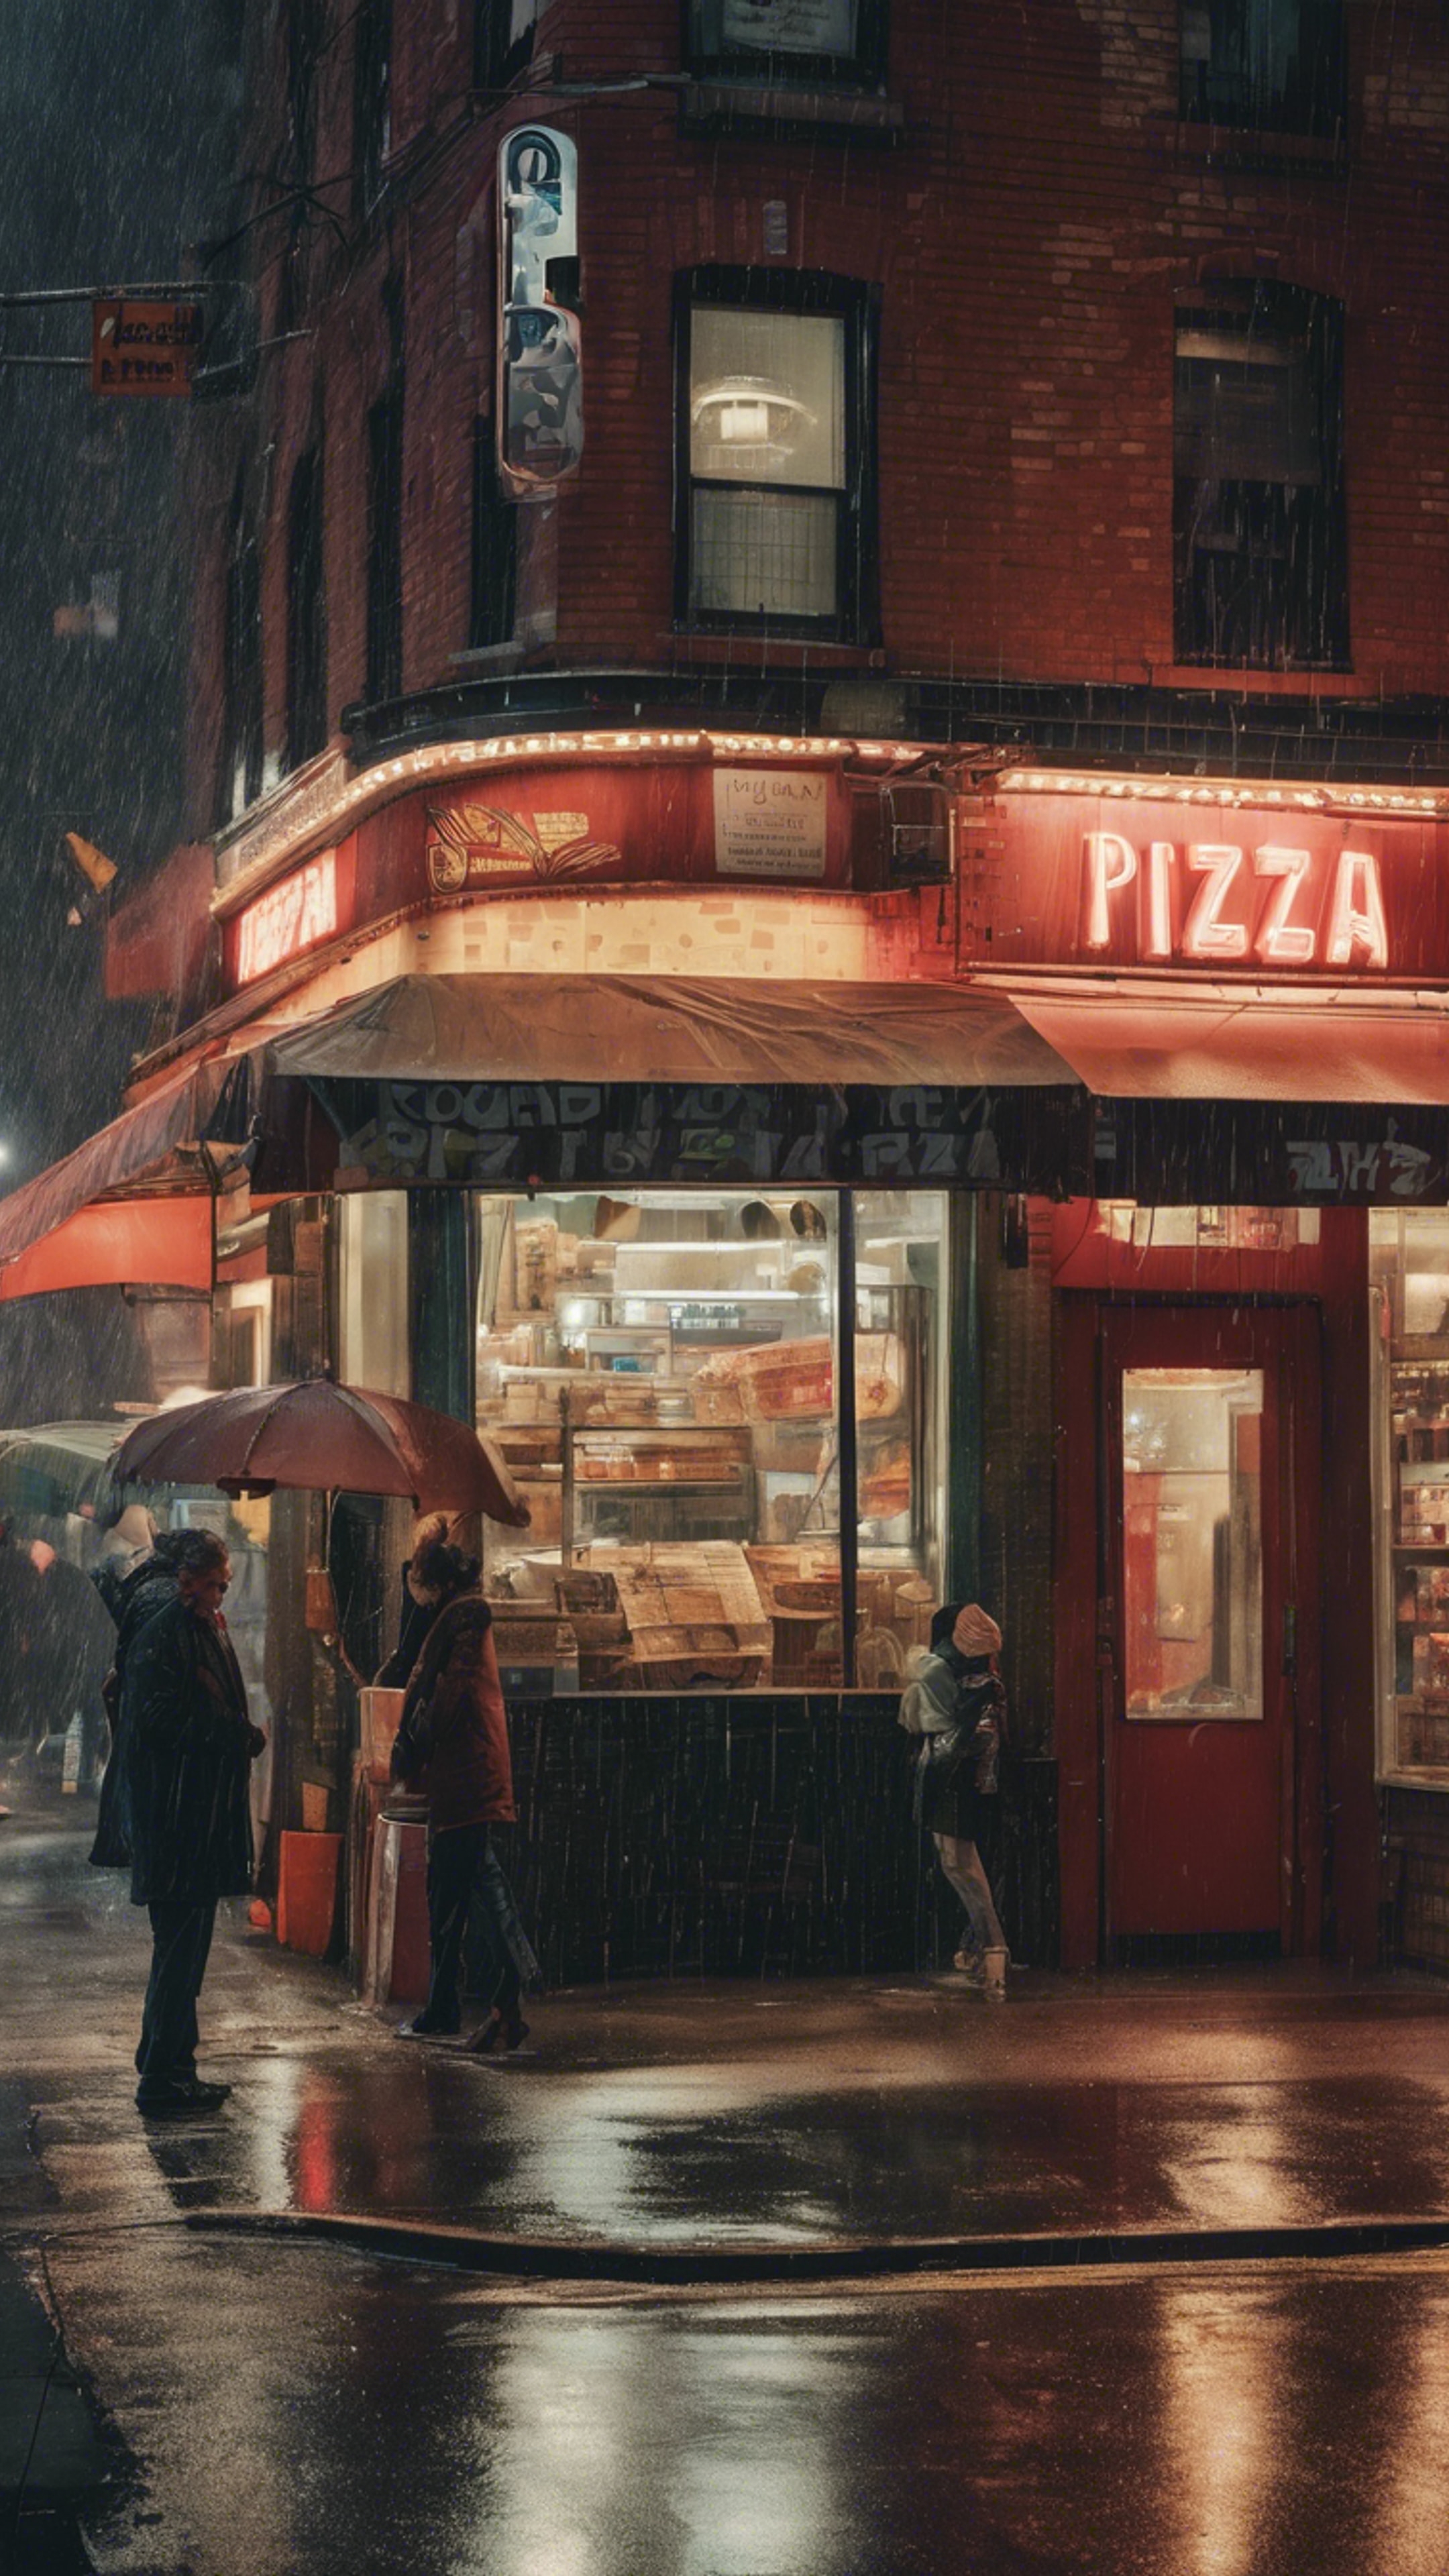 A pizza store in New York City bustling with customers on a rainy night. Wallpaper[9eb5e7f3f7b747098b42]